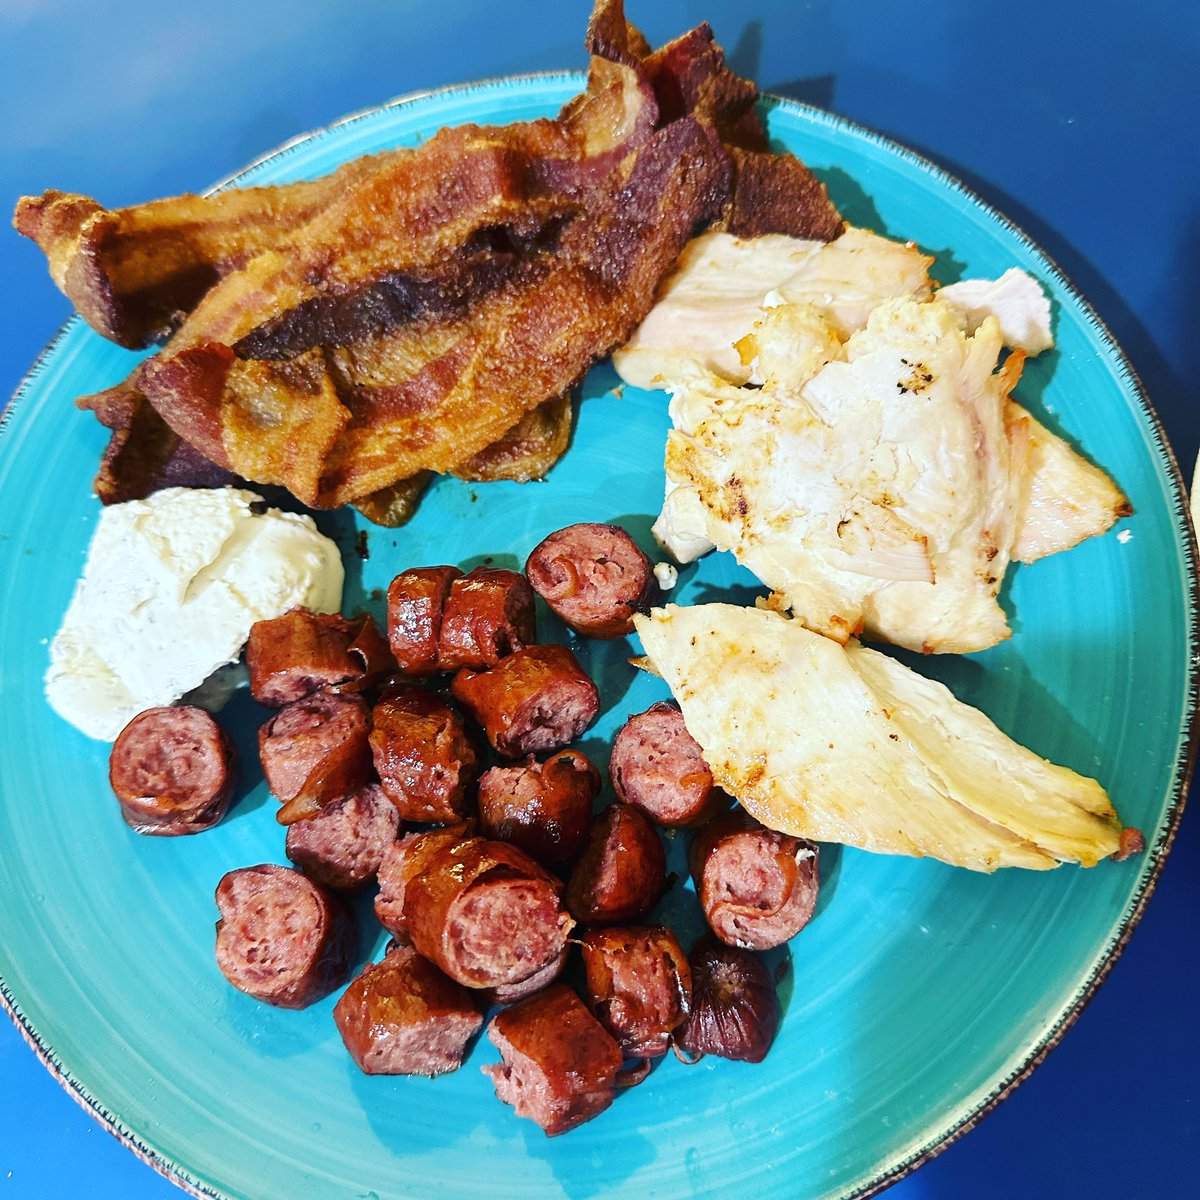 Yummy keto lunch: 🥓 airfryer bacon, polish sausage, rotisserie chicken & homemade yogurt 🍗 What’s on your plate today? #keto #simplefood #easy #quick #food #lowcarb #whatieat